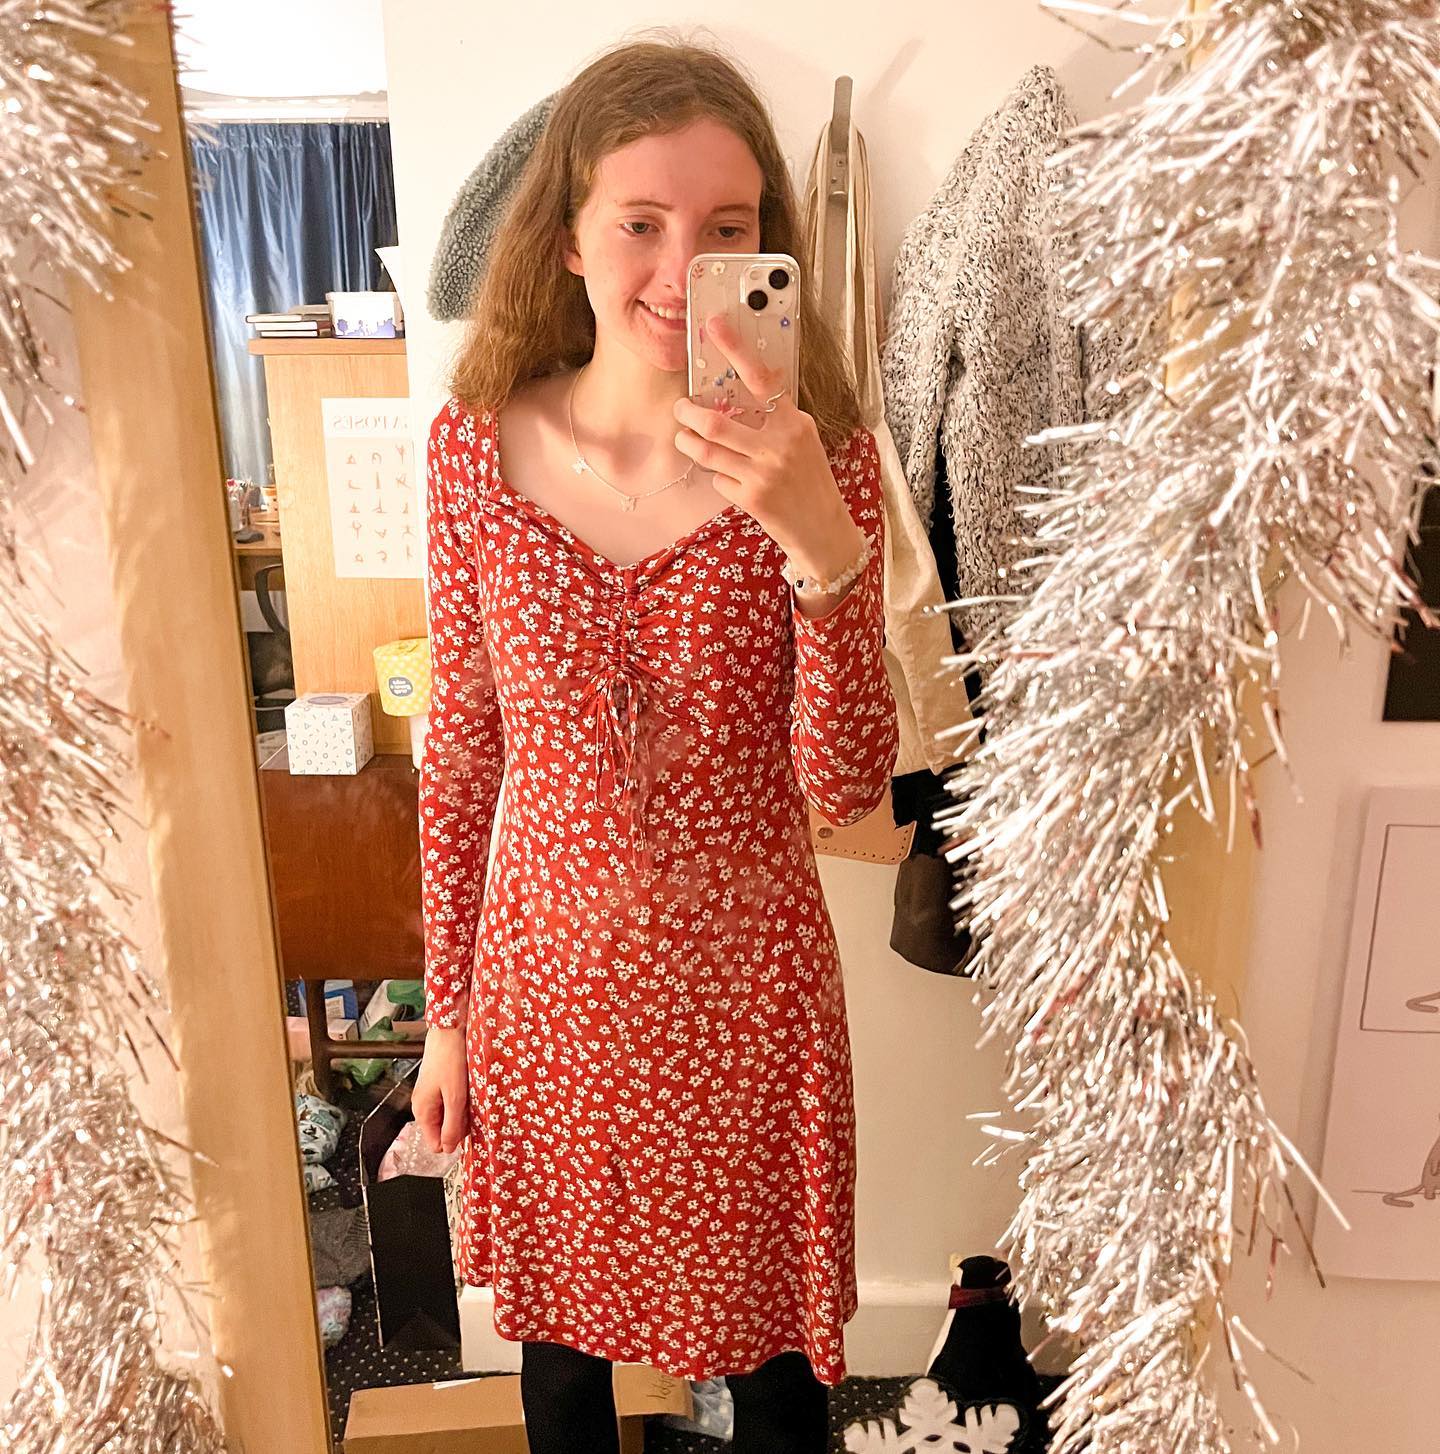 In love with this dress❣️🌸
-
Bought this dress from @vinted but it’s originally from @nobodyschild which makes it an even better purchase! Giving something a second life is already amazing, but from a sustainable company means that it should be made from sustainable materials 🪡 
-
What’s your fave 2nd hand clothing purchase? 👗 
-
#sustainableliving #sustainableblogger #ecoblogger #secondhand #secondhandfinds #secondhandclothes #vintedtreasures #thriftedfinds #ecolifestyle